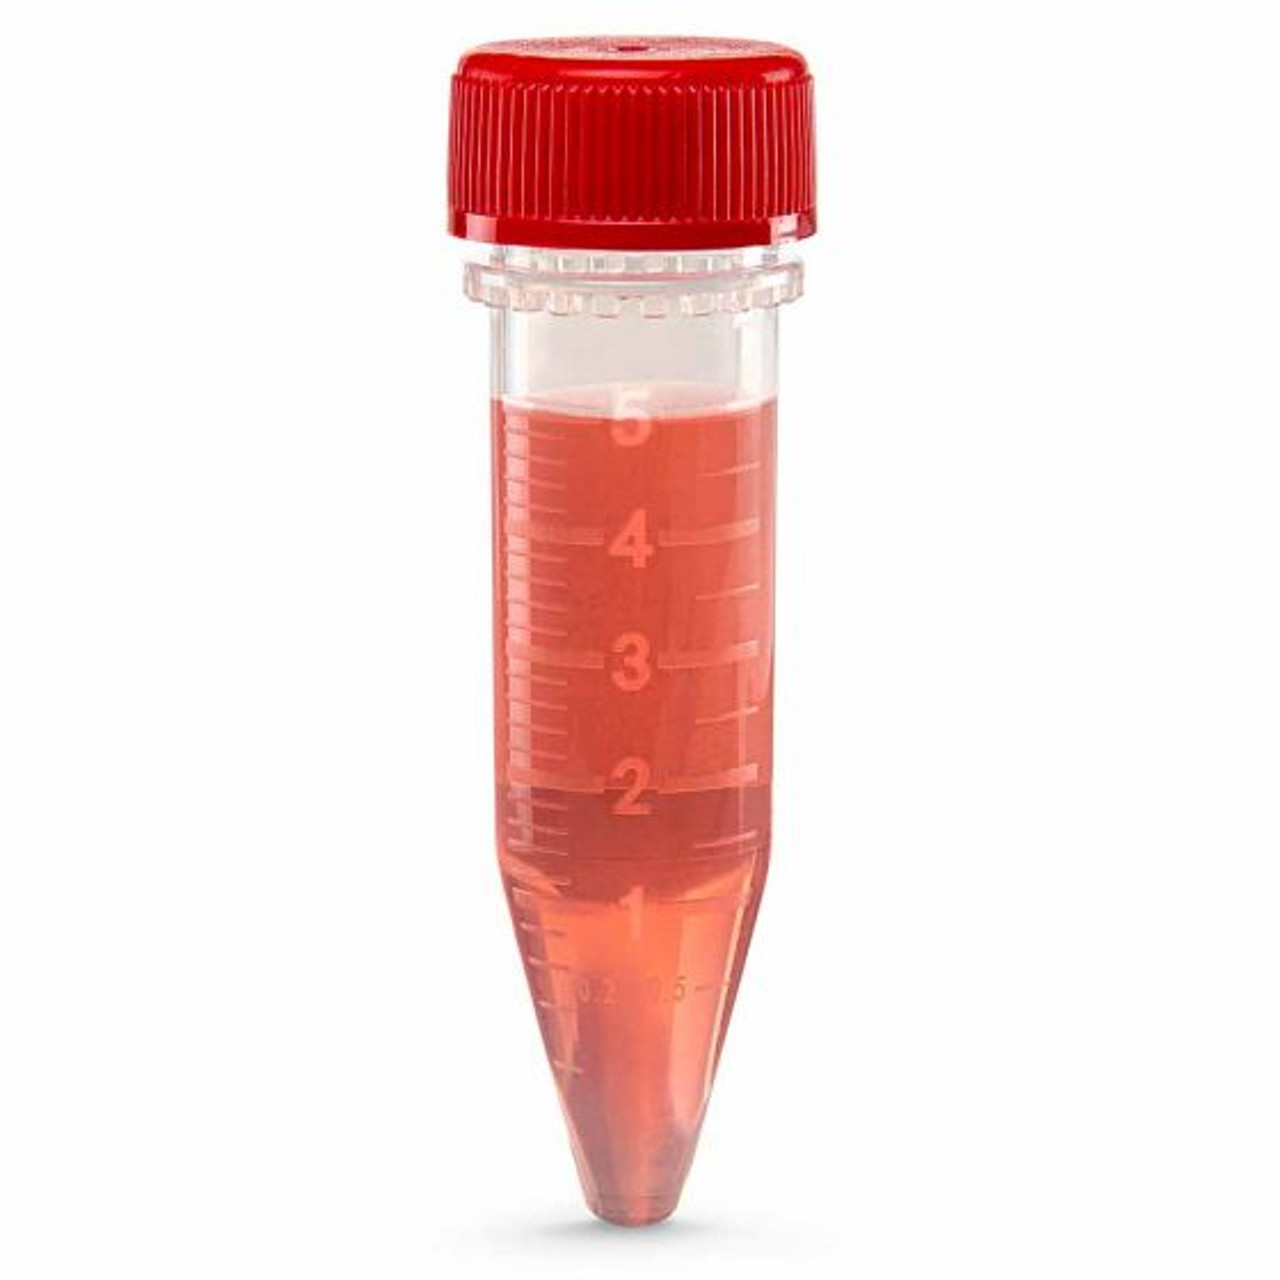 https://cdn11.bigcommerce.com/s-w9bdixgj/images/stencil/1280x1280/products/3705/8360/Sterile_5mL_Conical_Centrifuge_Tube_with_Red_Screw_Cap_For_Collecting_Samples_-_Lab_Supplies_-_Stellar_Scientific__37456.1608755136.jpg?c=2